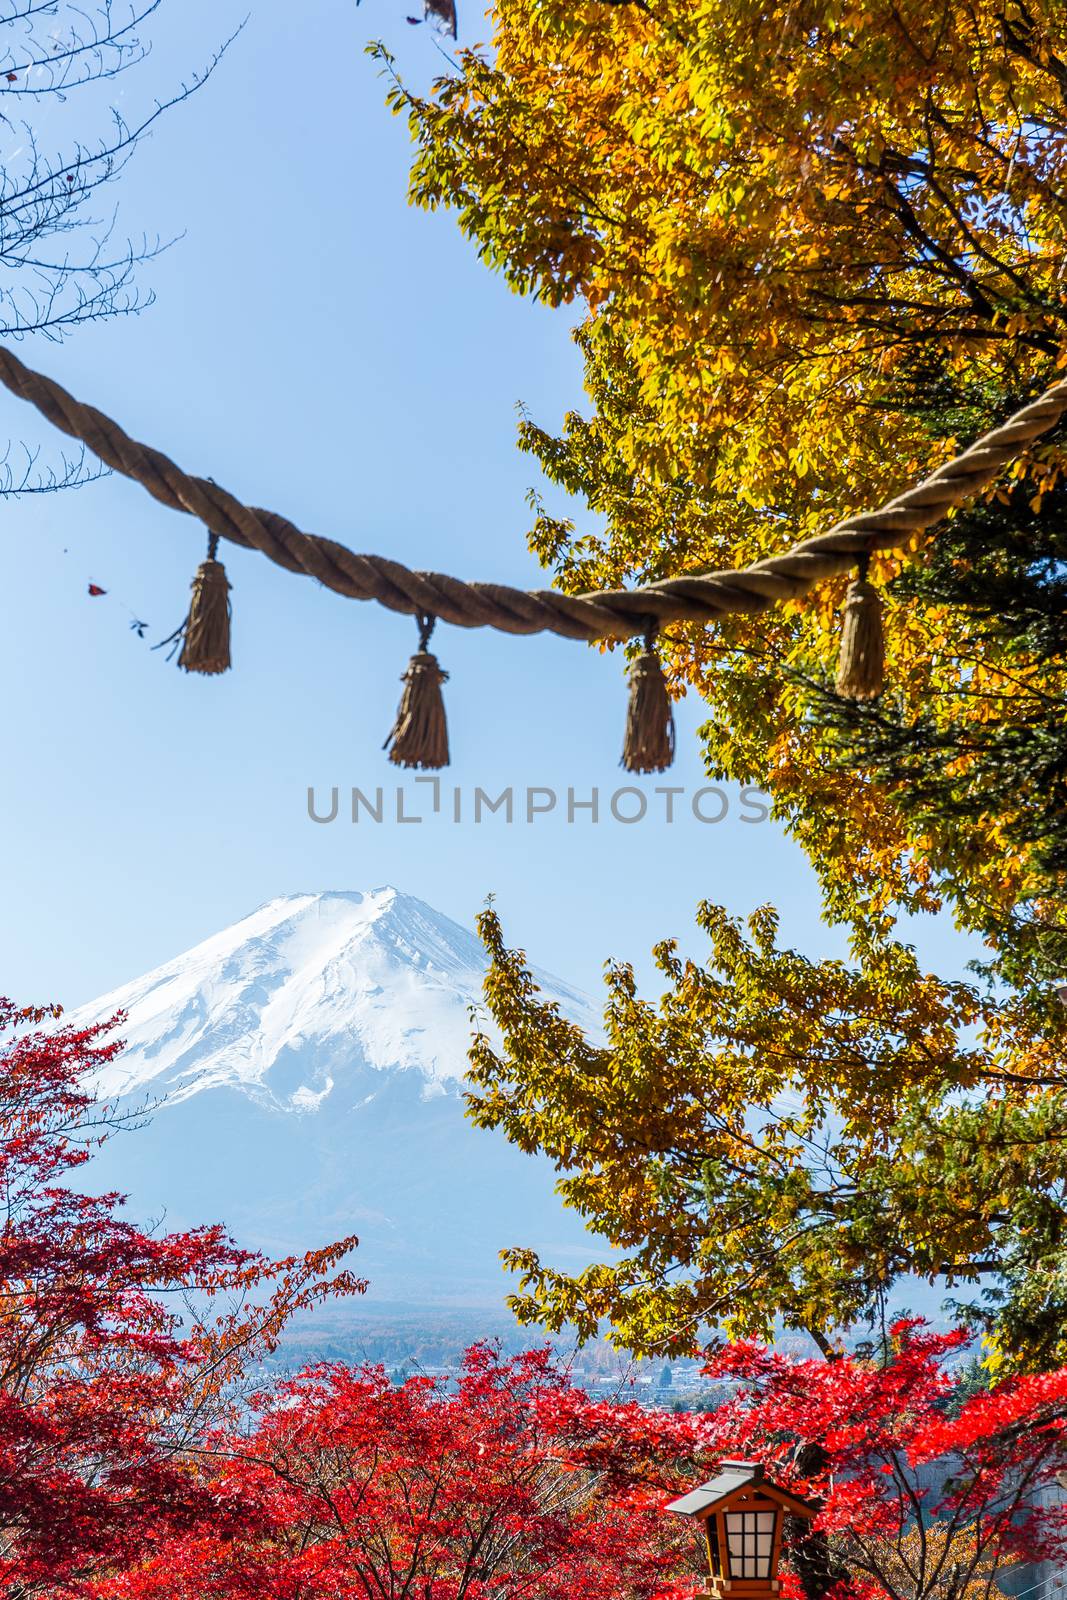 Mount Fuji with japanese temple rope